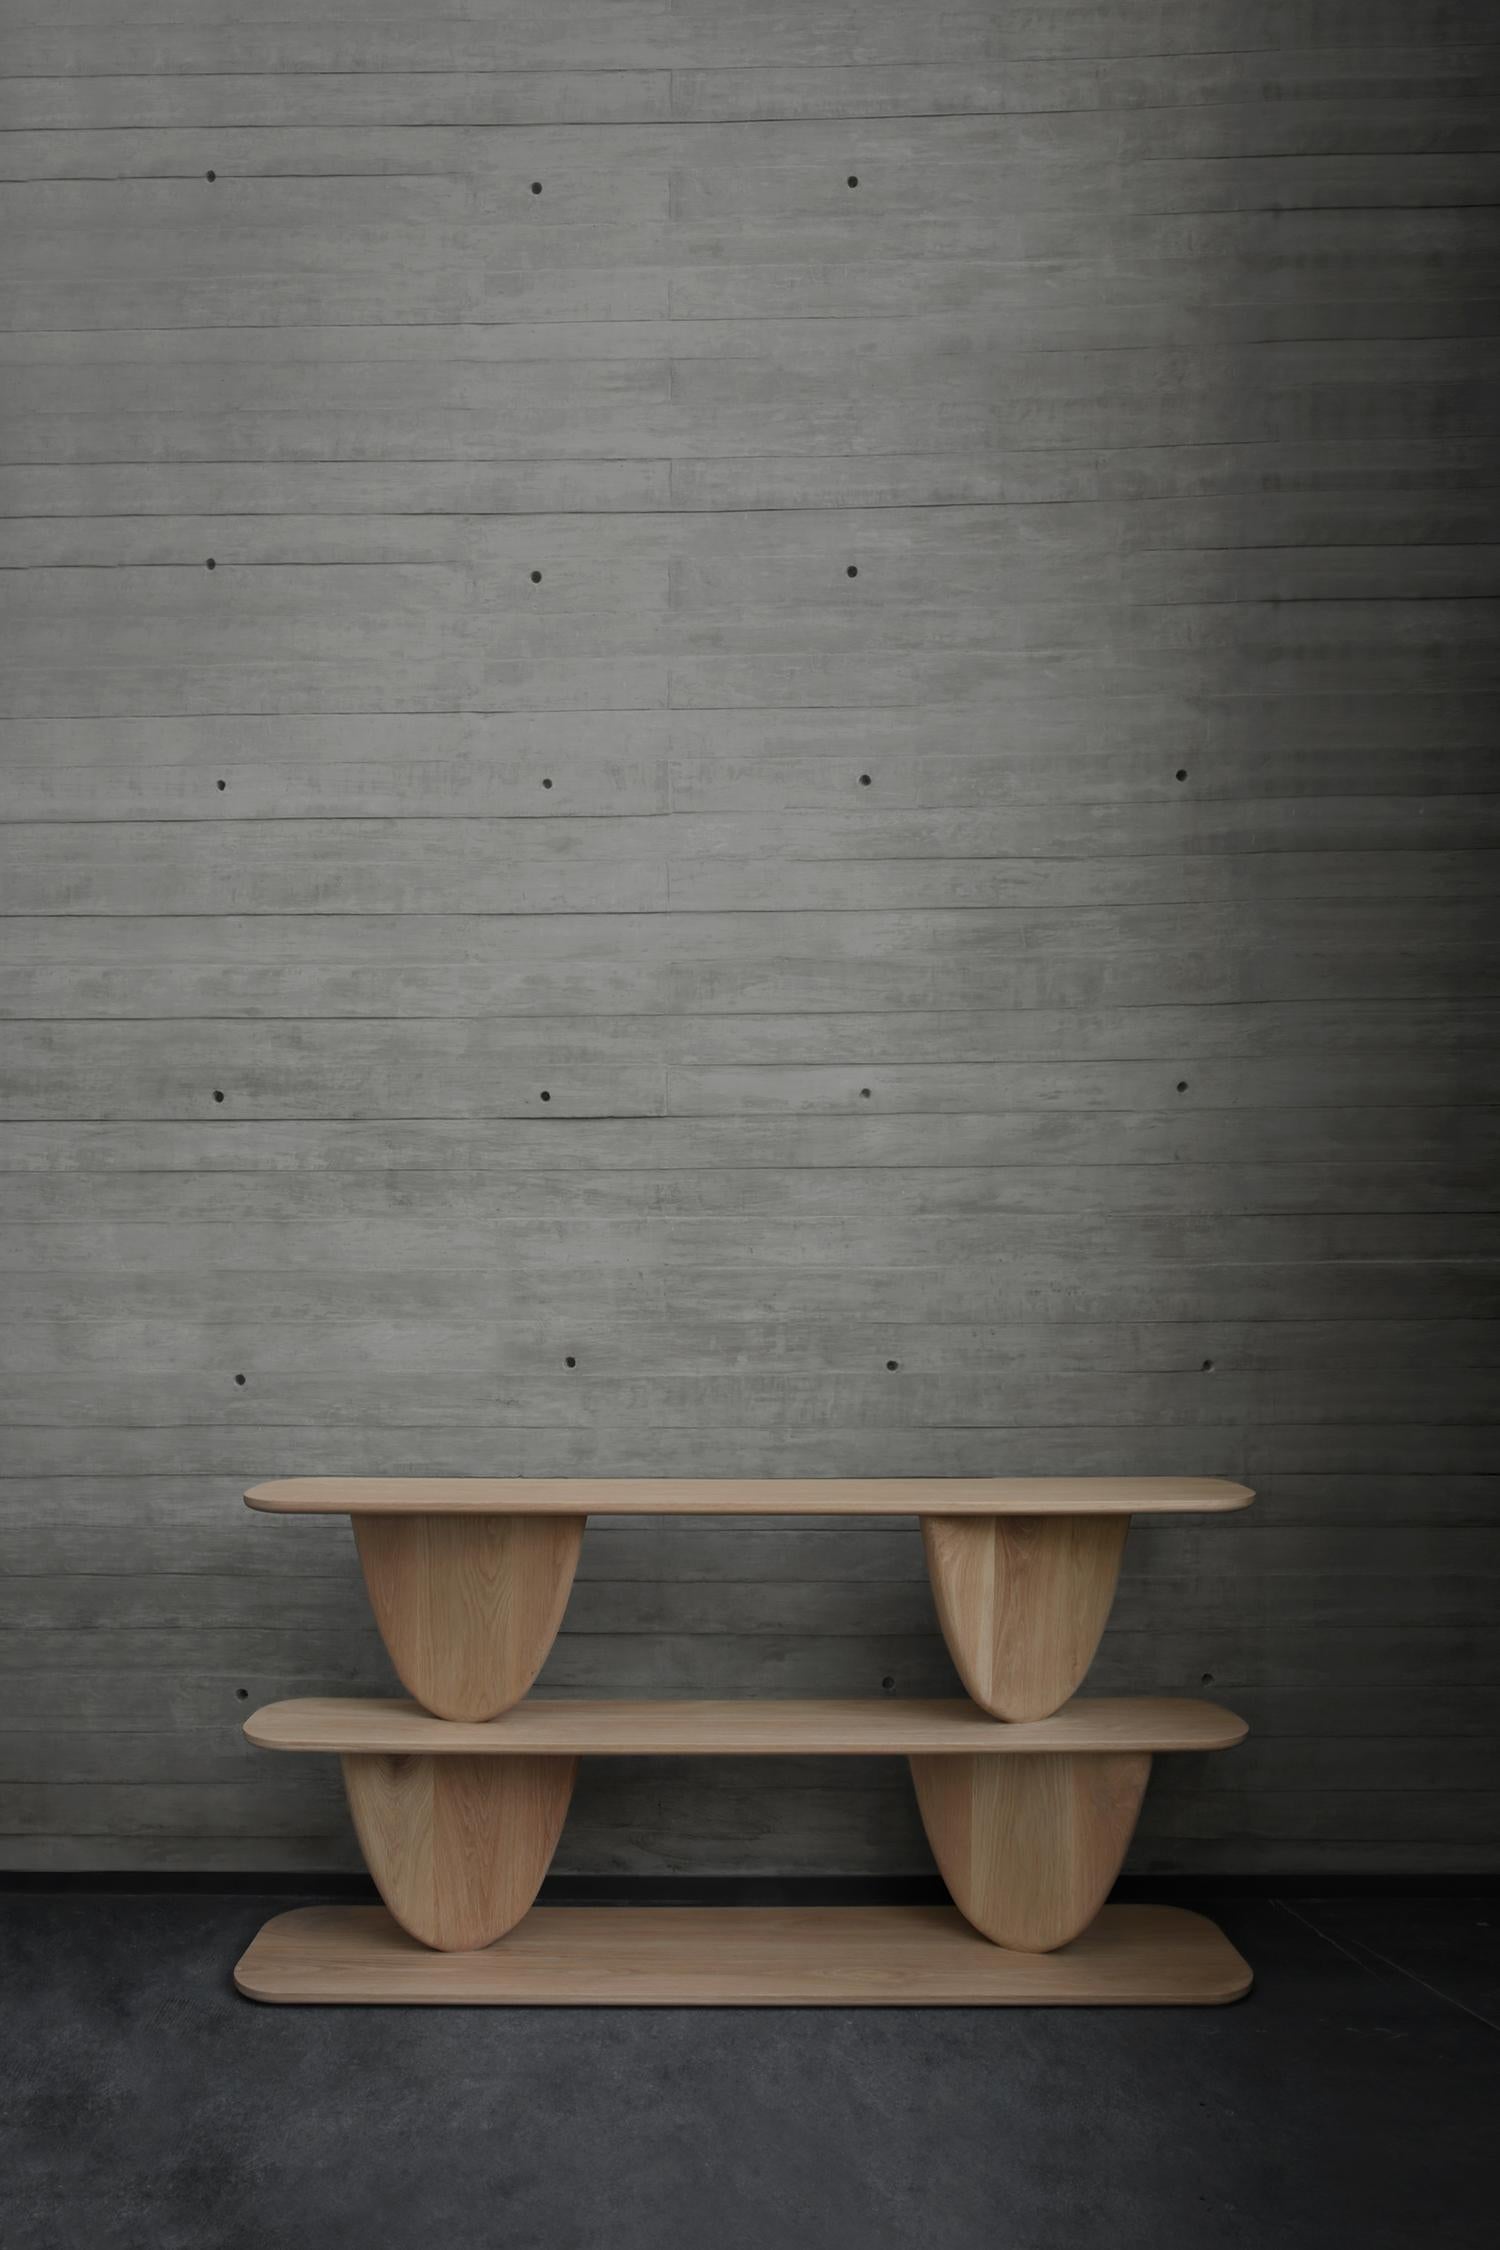 Mexican Noviembre IX, Console Table in Walnut Wood Inspired by Brancusi, Sideboard